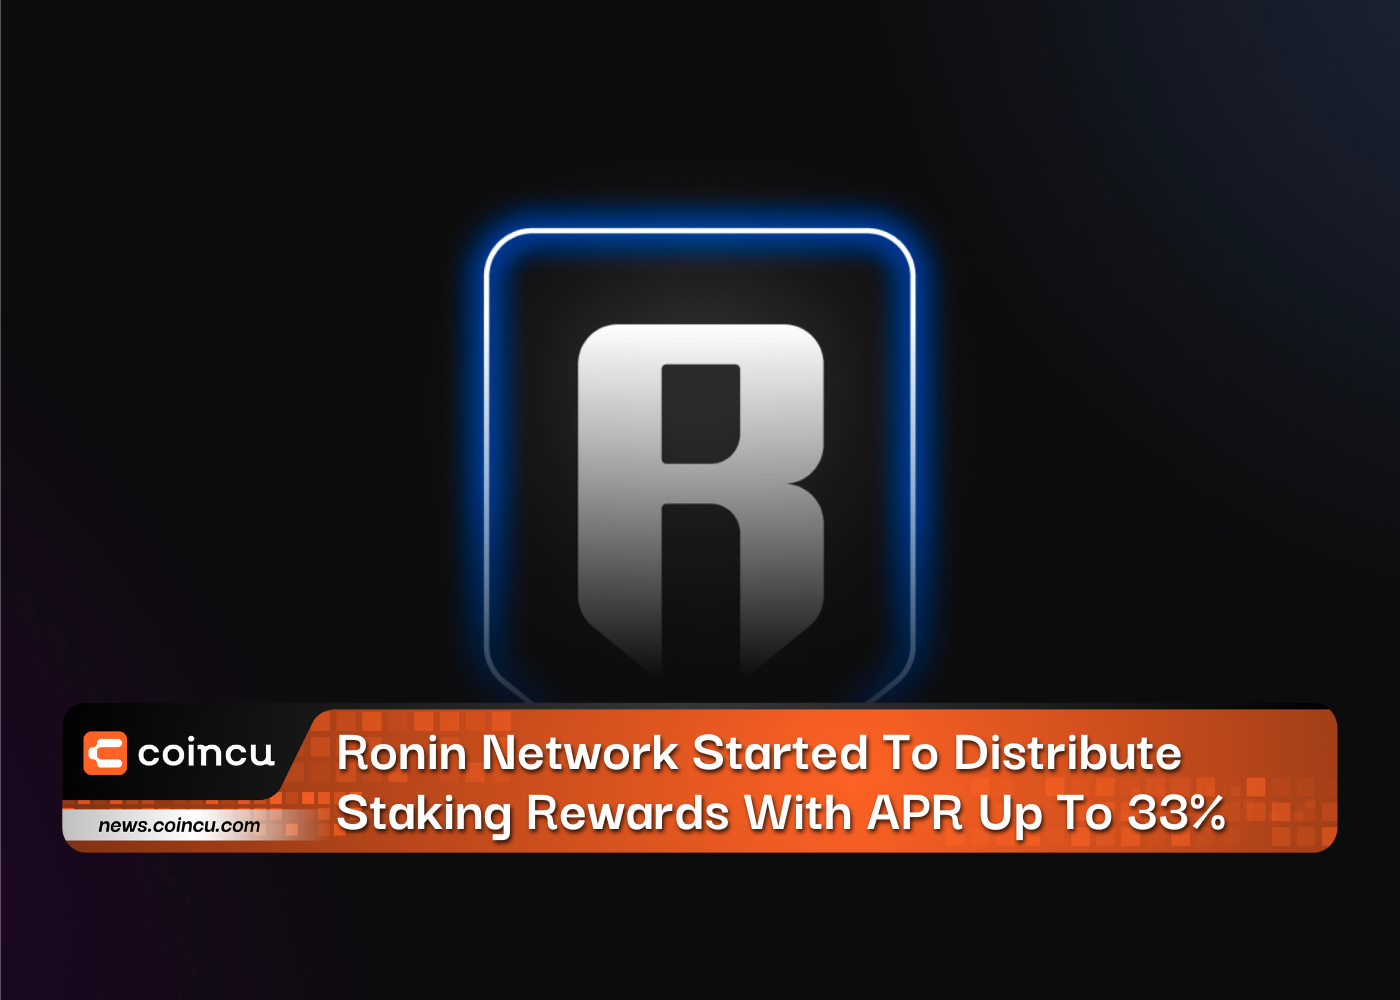 Ronin Network Started To Distribute Staking Rewards With APR Up To 33%